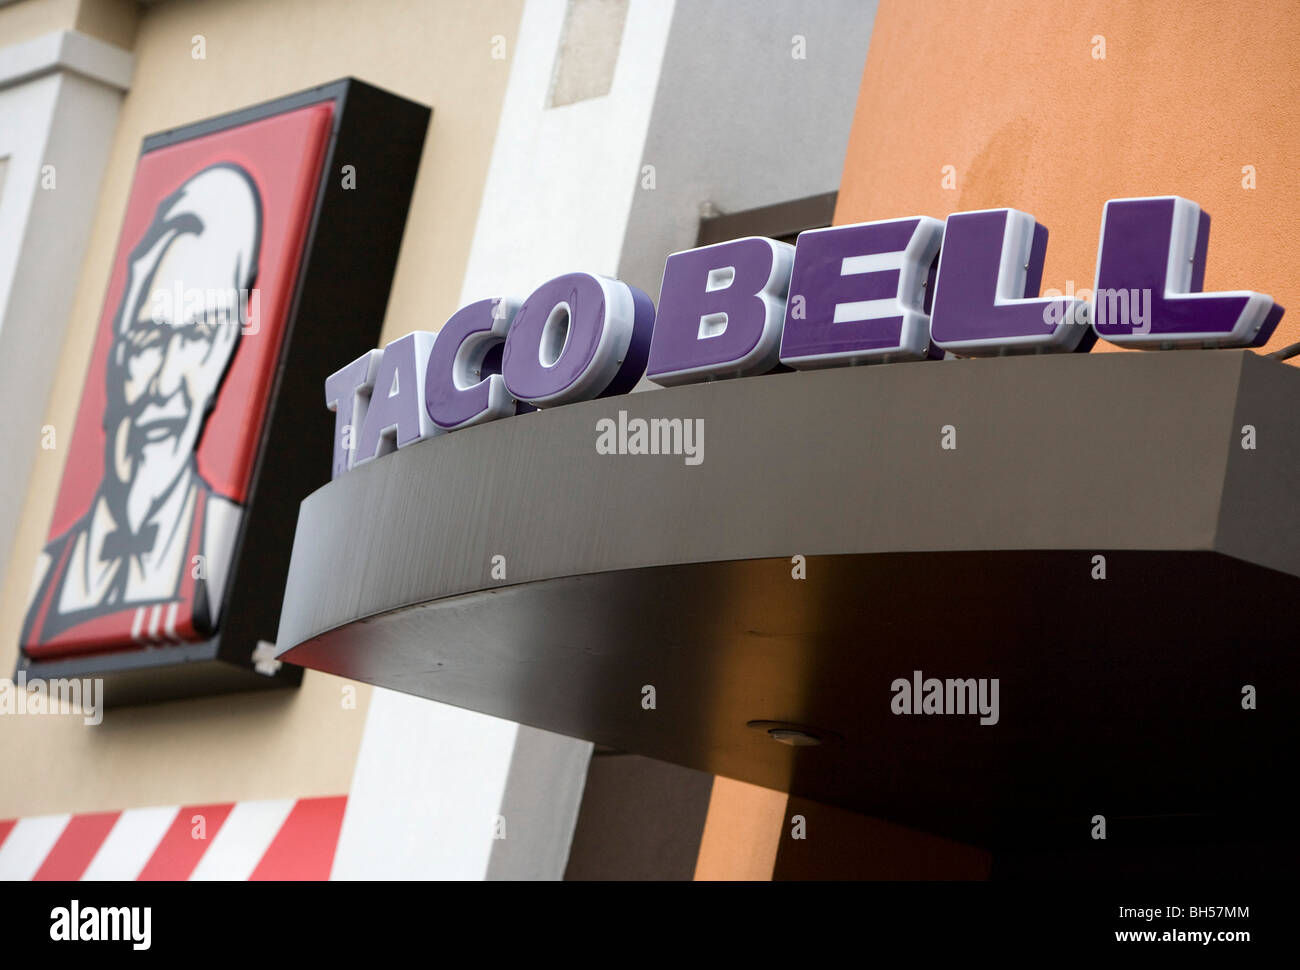 A Taco Bell and Kentucky Fried Chicken restaurant location.  Stock Photo